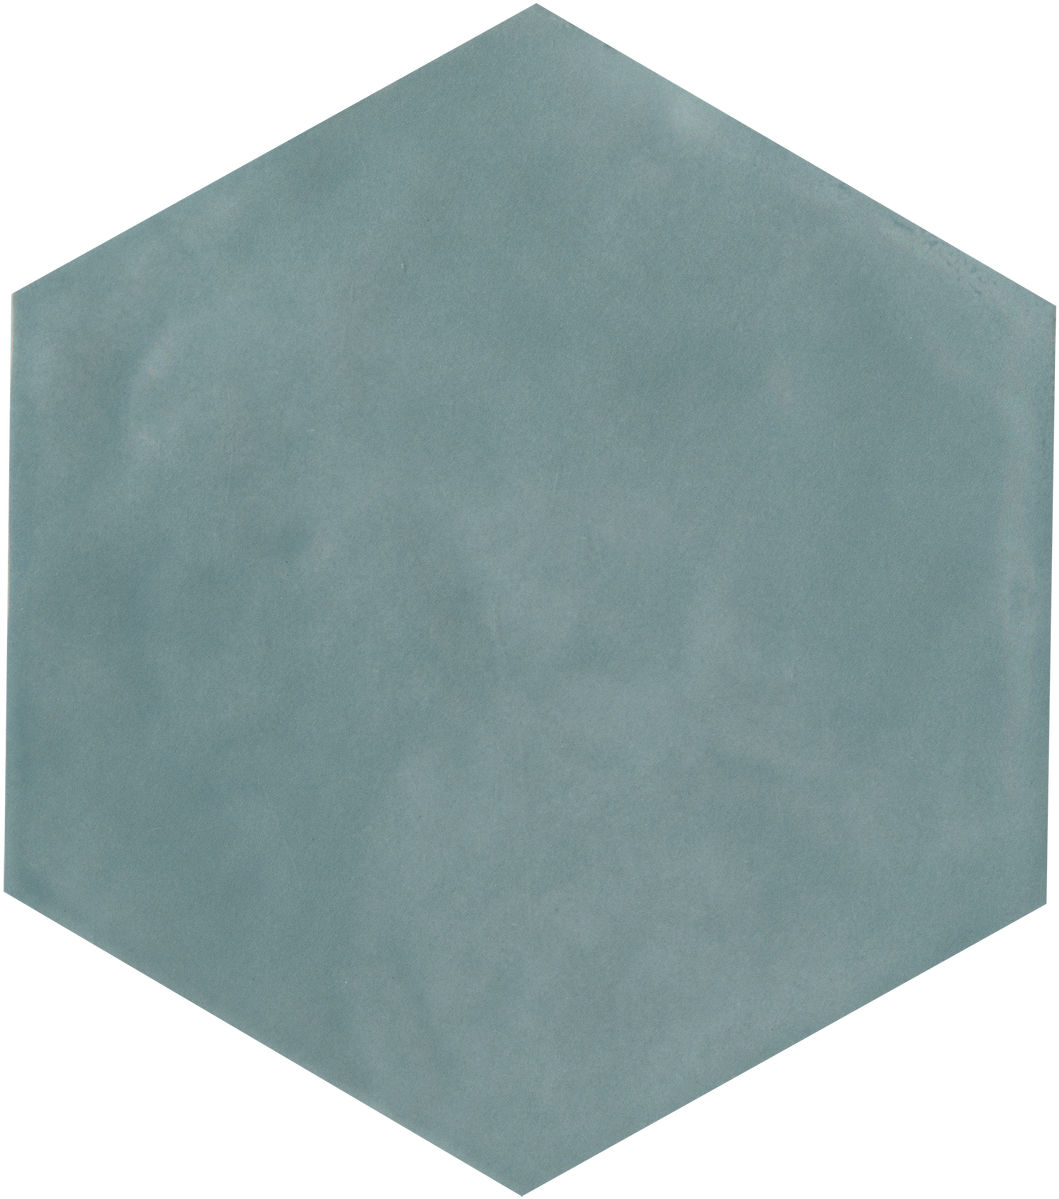 Blue Hexagon Texture Background PNG image